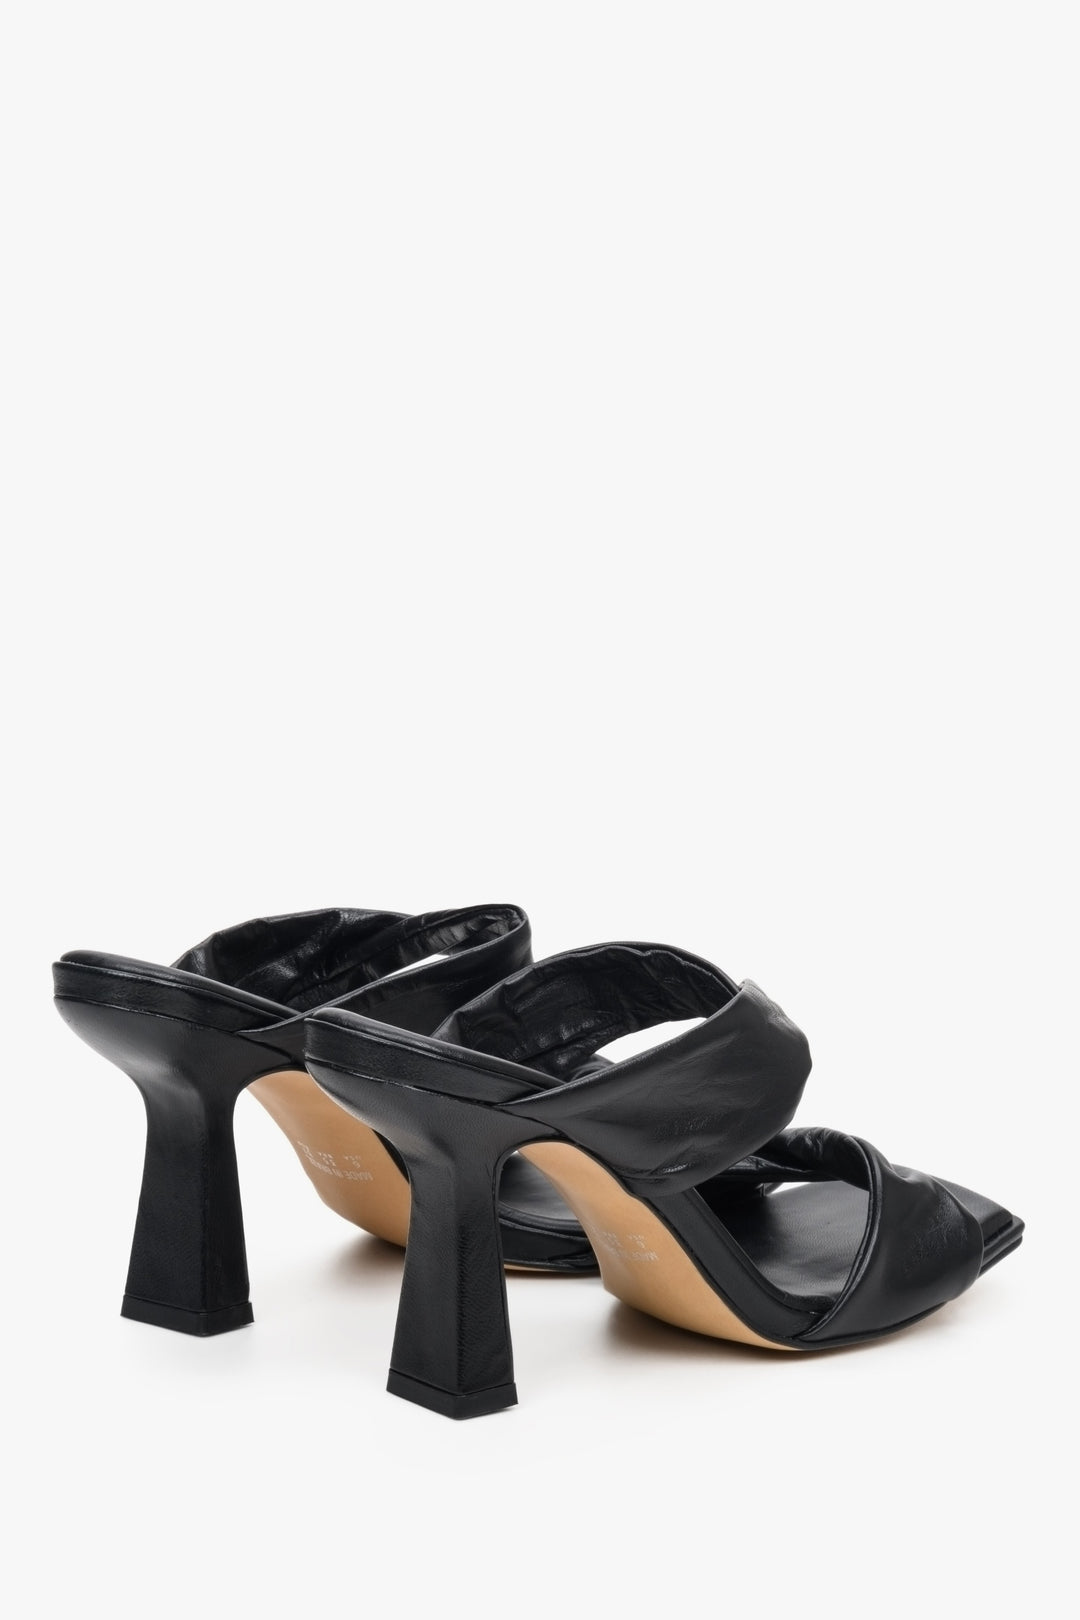 Women's black leather heeled sandals - close-up on the heel.